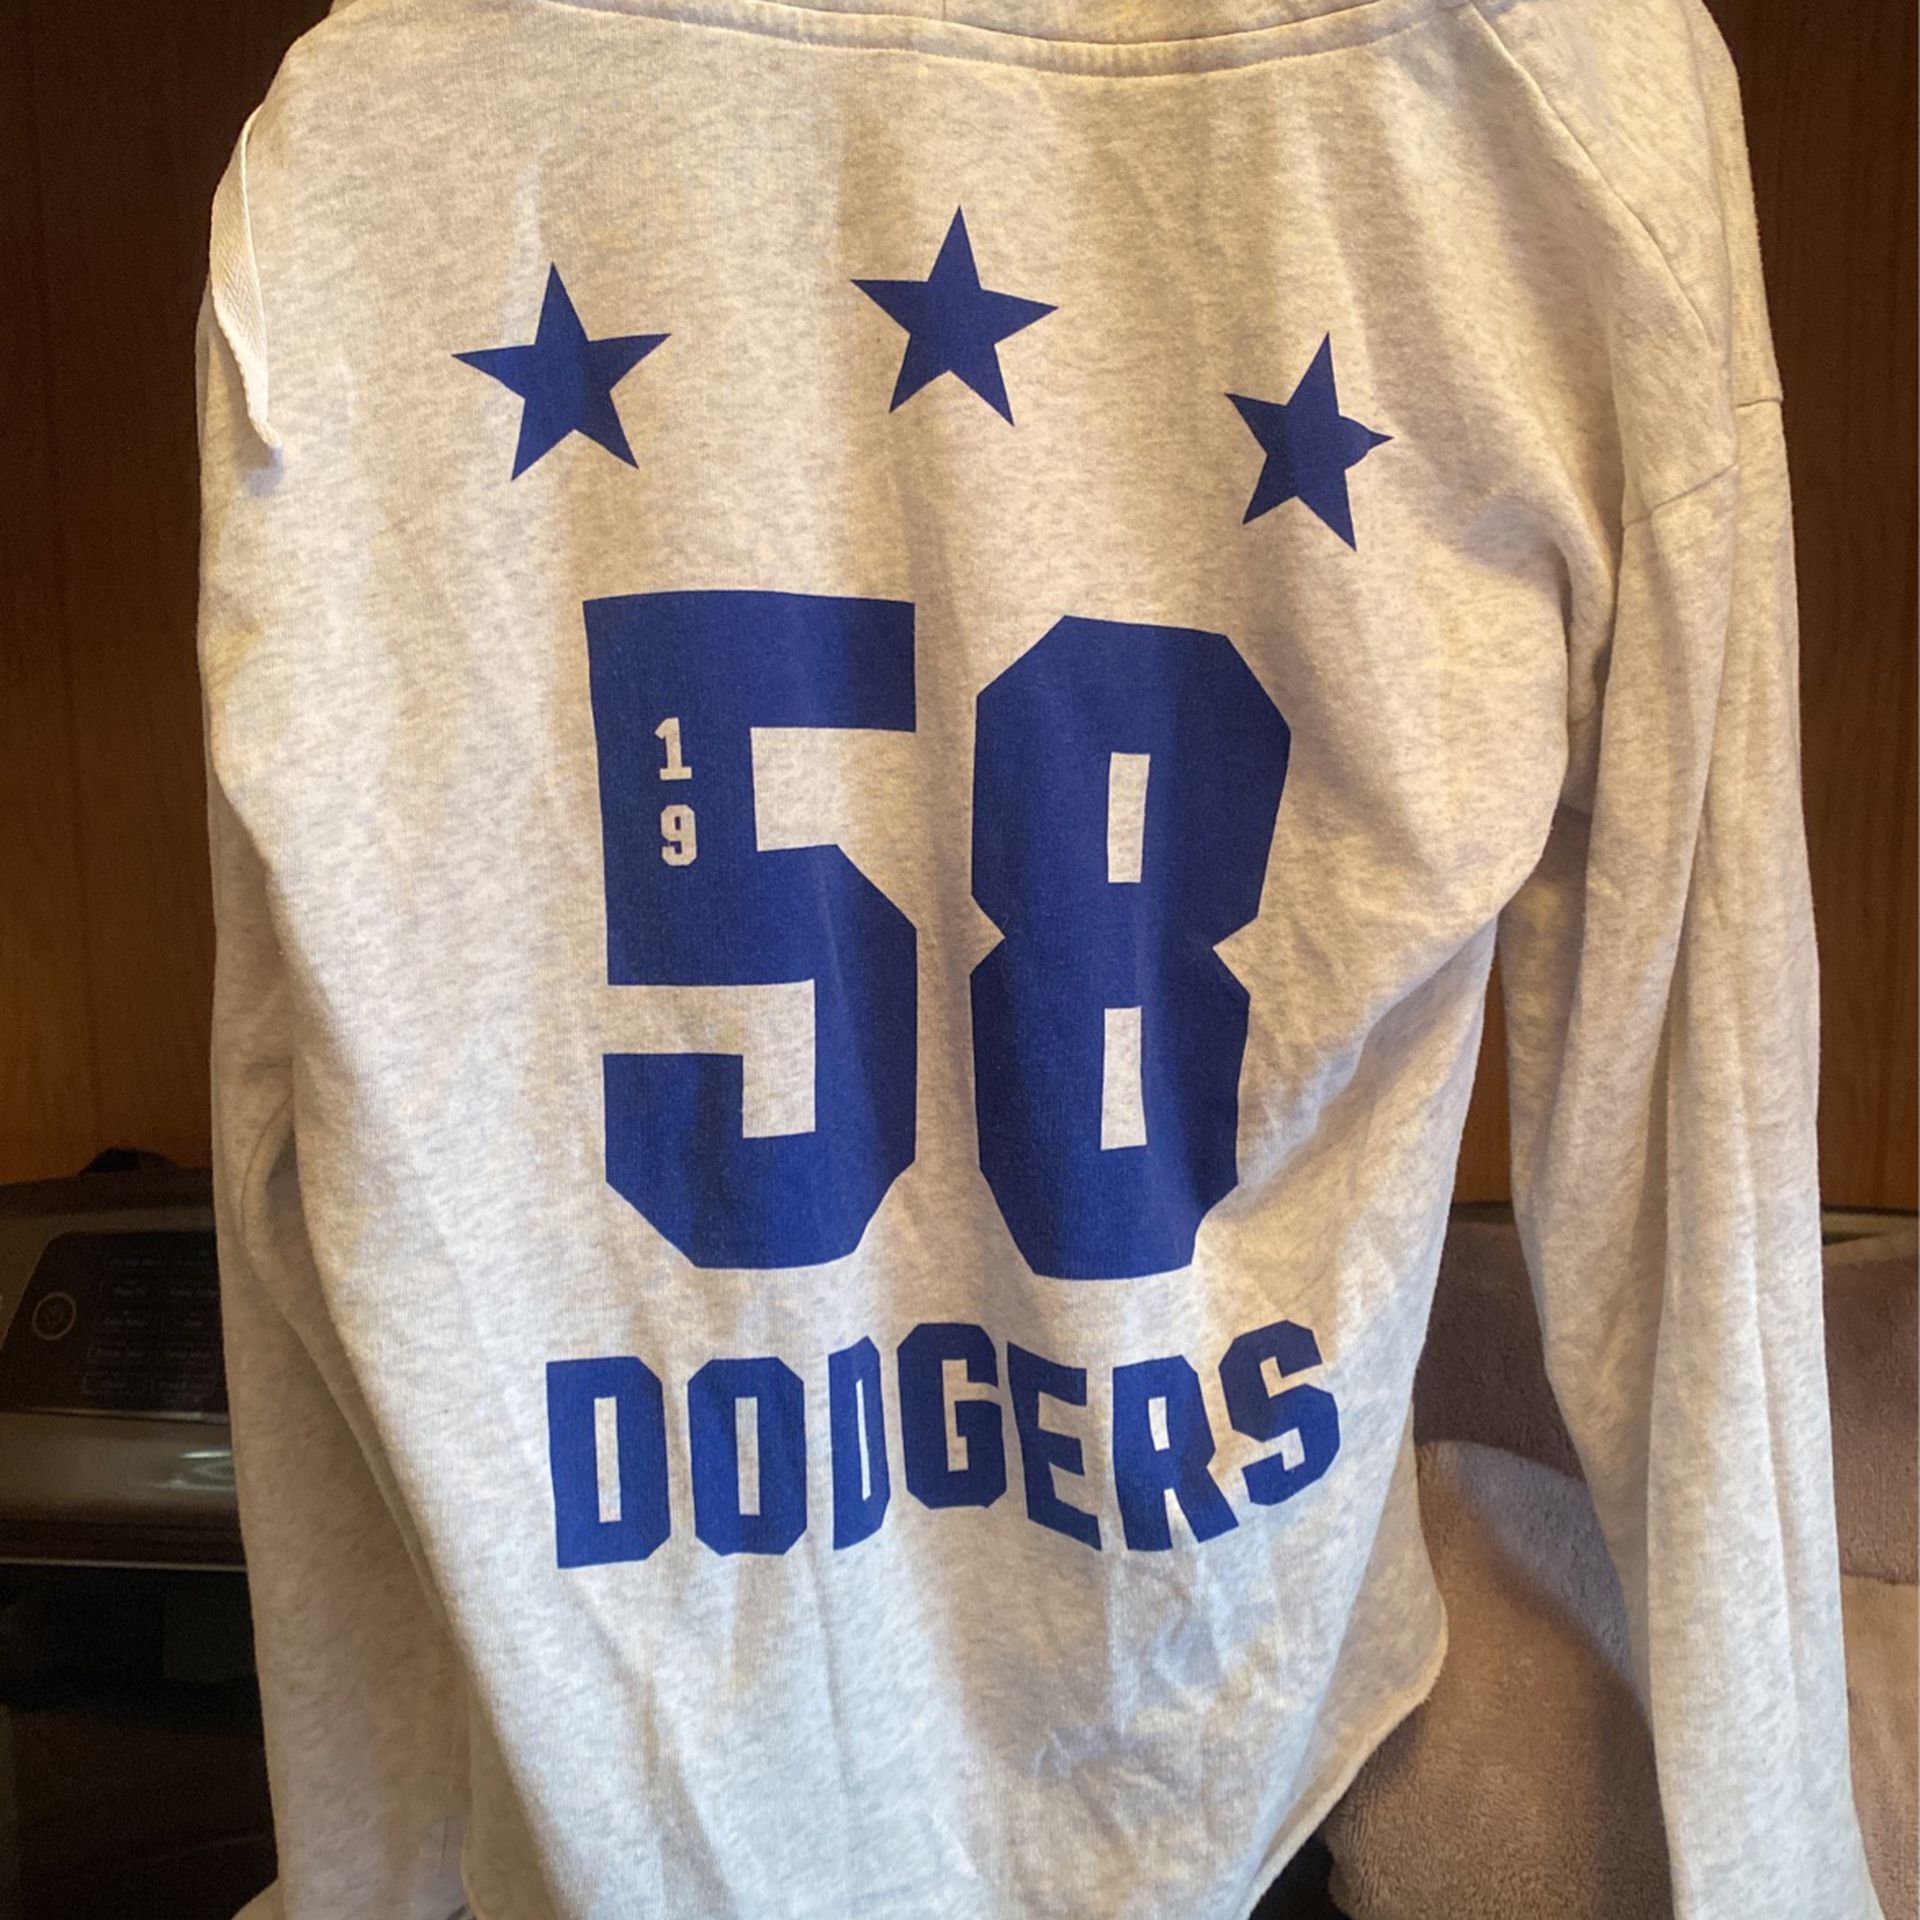 Dodgers / Disneyland Crewneck for Sale in Rancho Cucamonga, CA - OfferUp